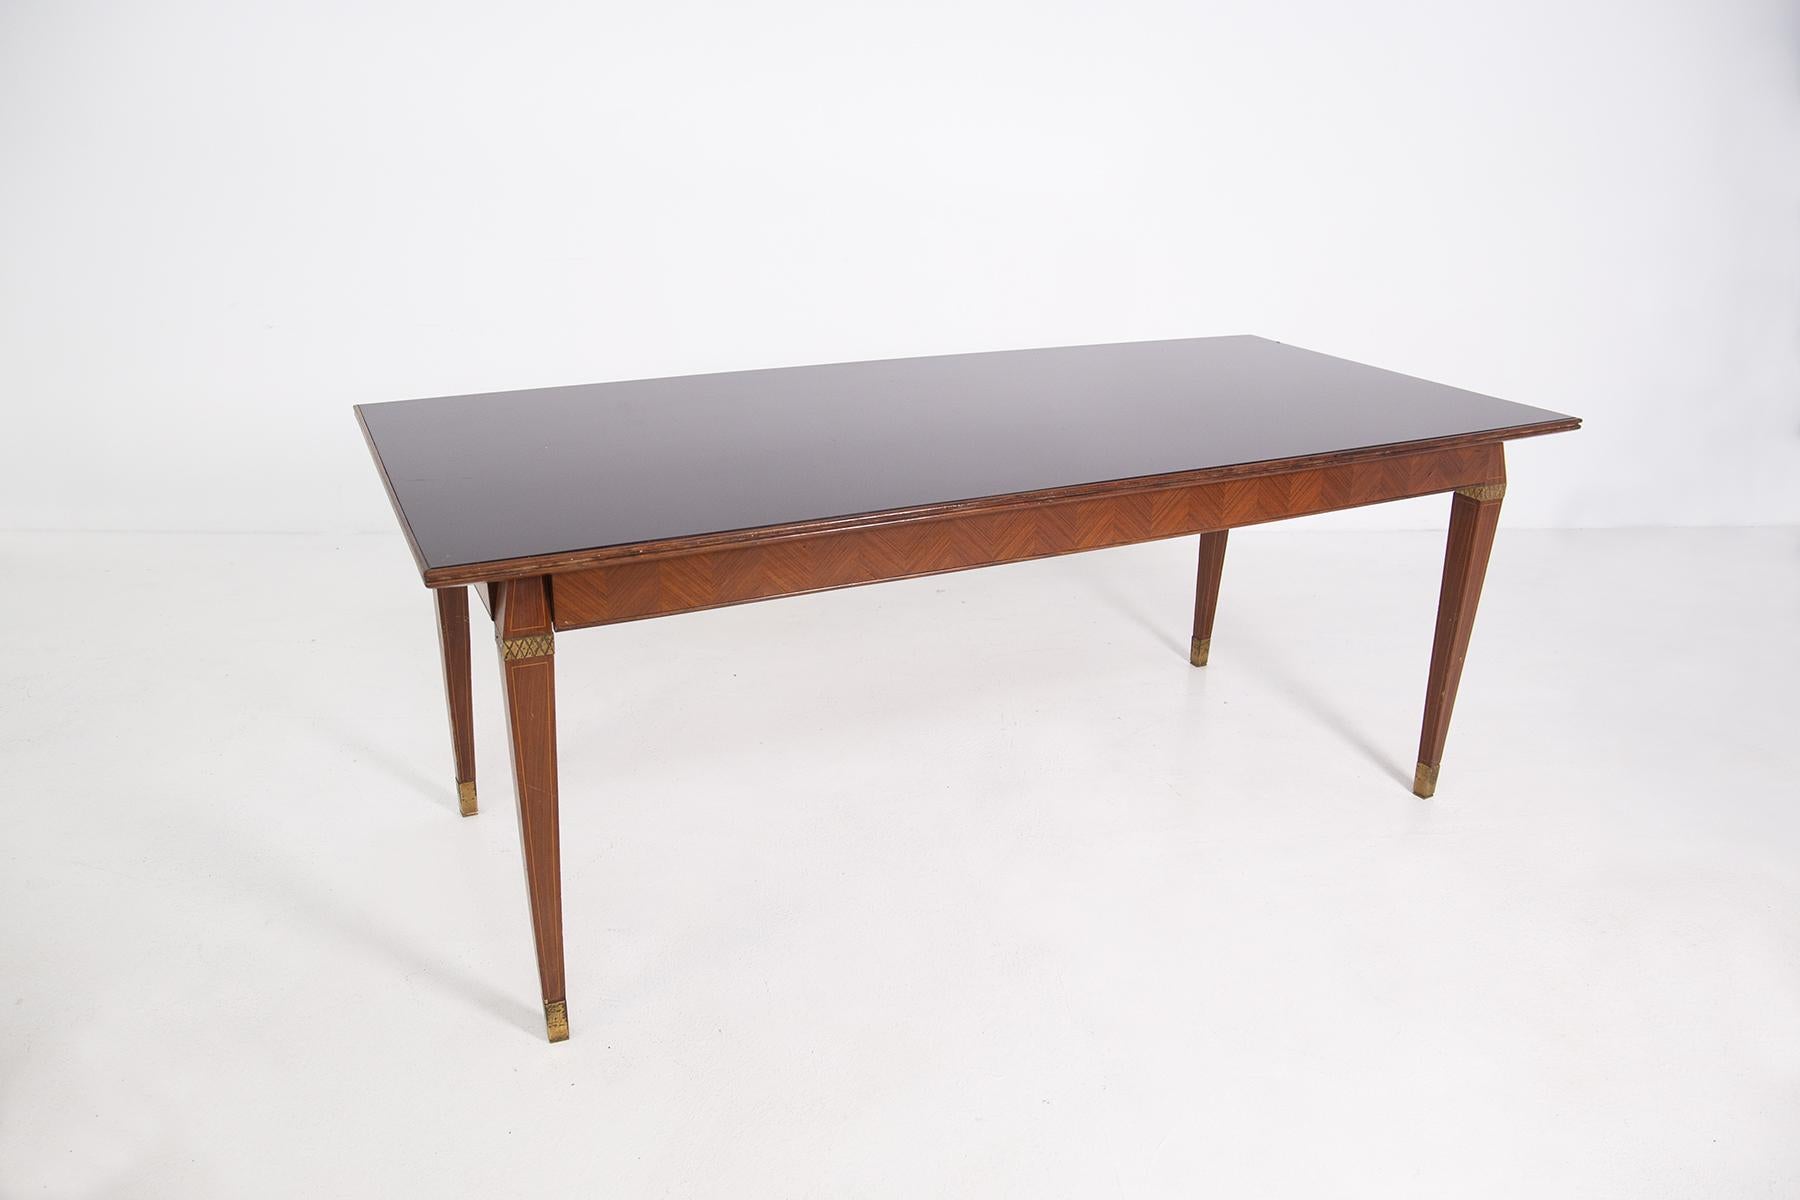 Italian dining table in the style of Paolo Buffa from the 1950s.
The table has wood grain and small painted elements in its legs.
The table legs have a prism shape and as a final element there is a brass ferrule. In the upper part of the leg there